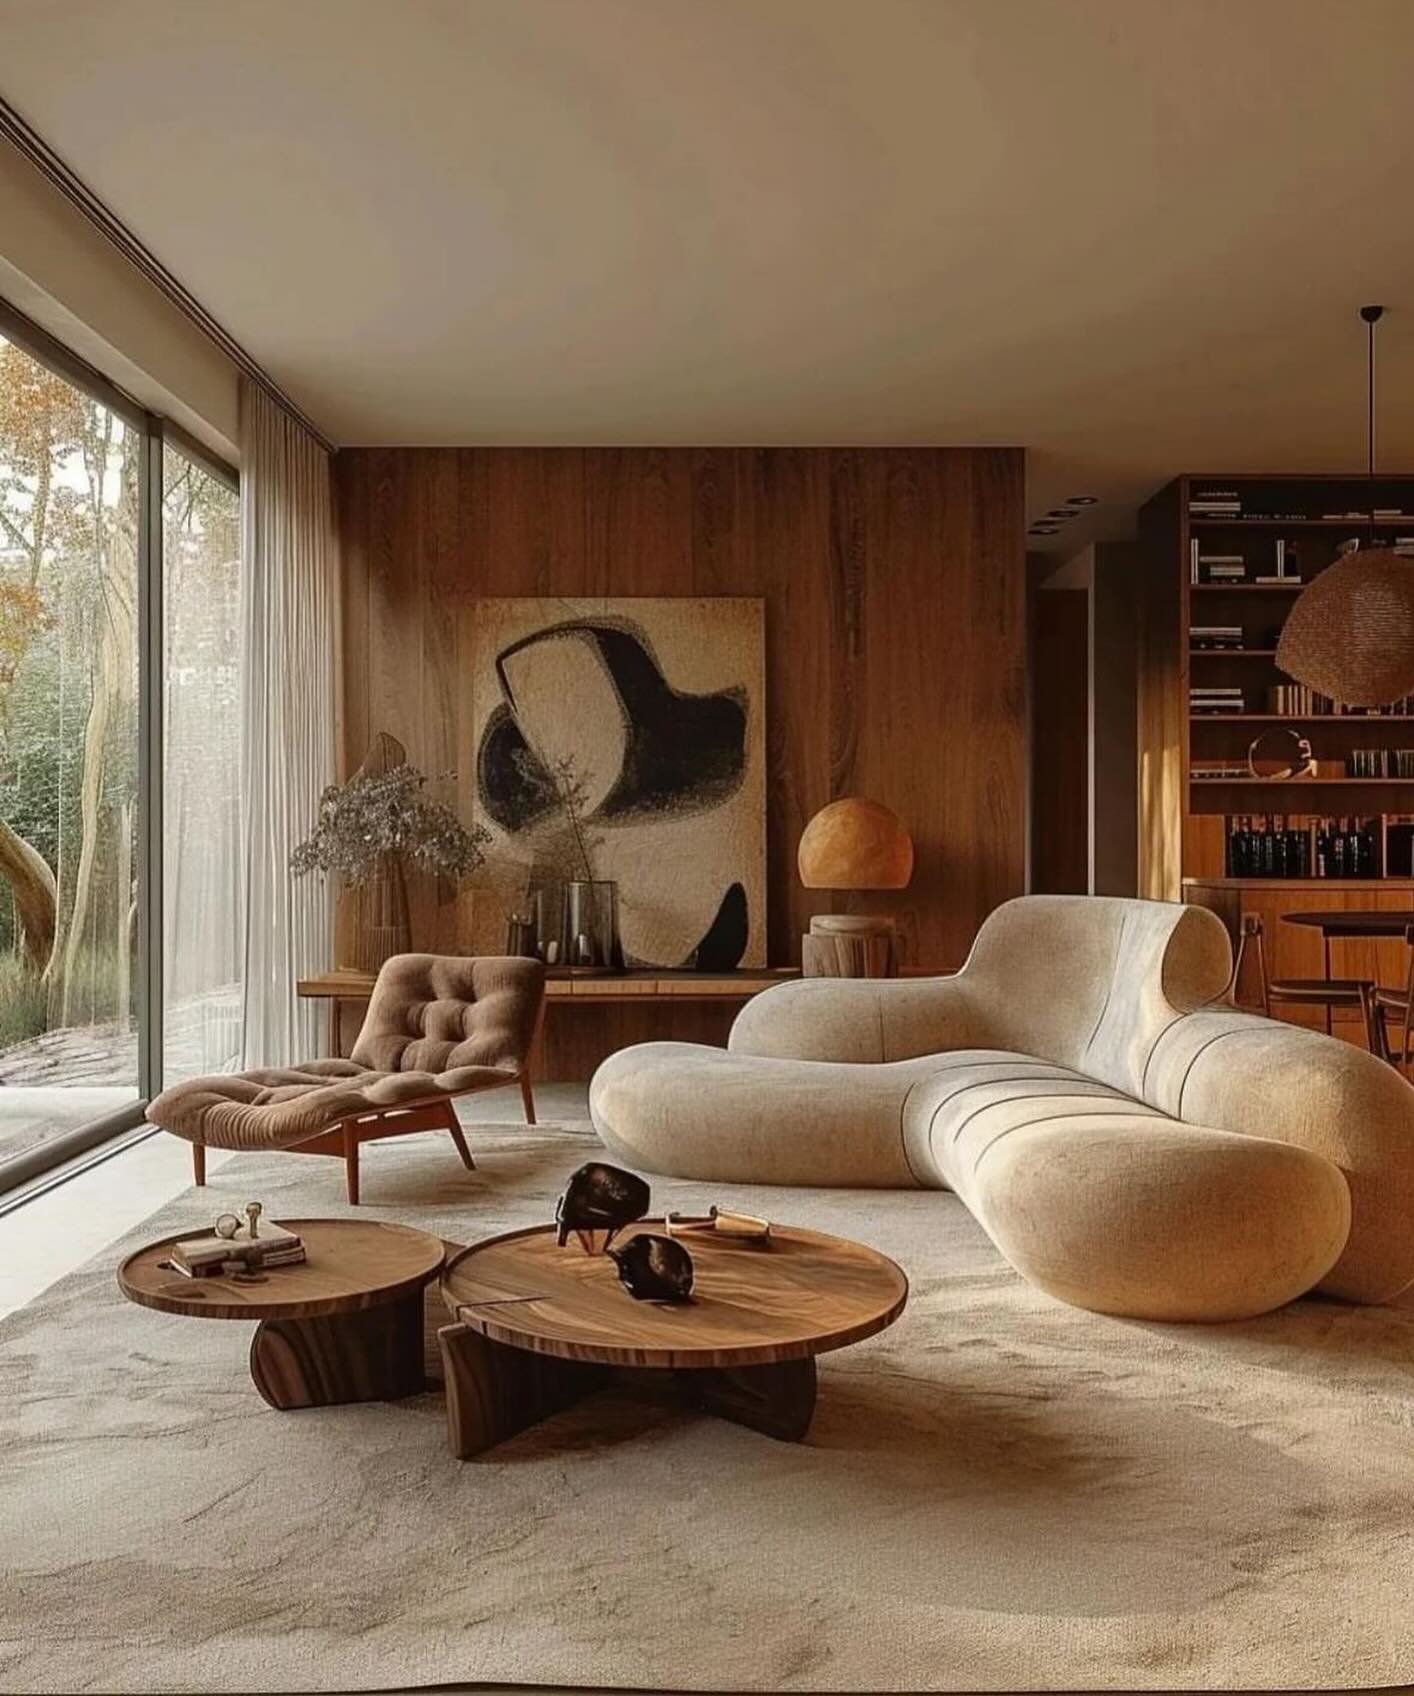 Loving the soft shapes and the juxtaposition of textures and colors

🧡

#interiordesign #interiordesigner #architect #architecture #neutralcolors #livingroom #residentialdesign #luxuryhomes #luxury